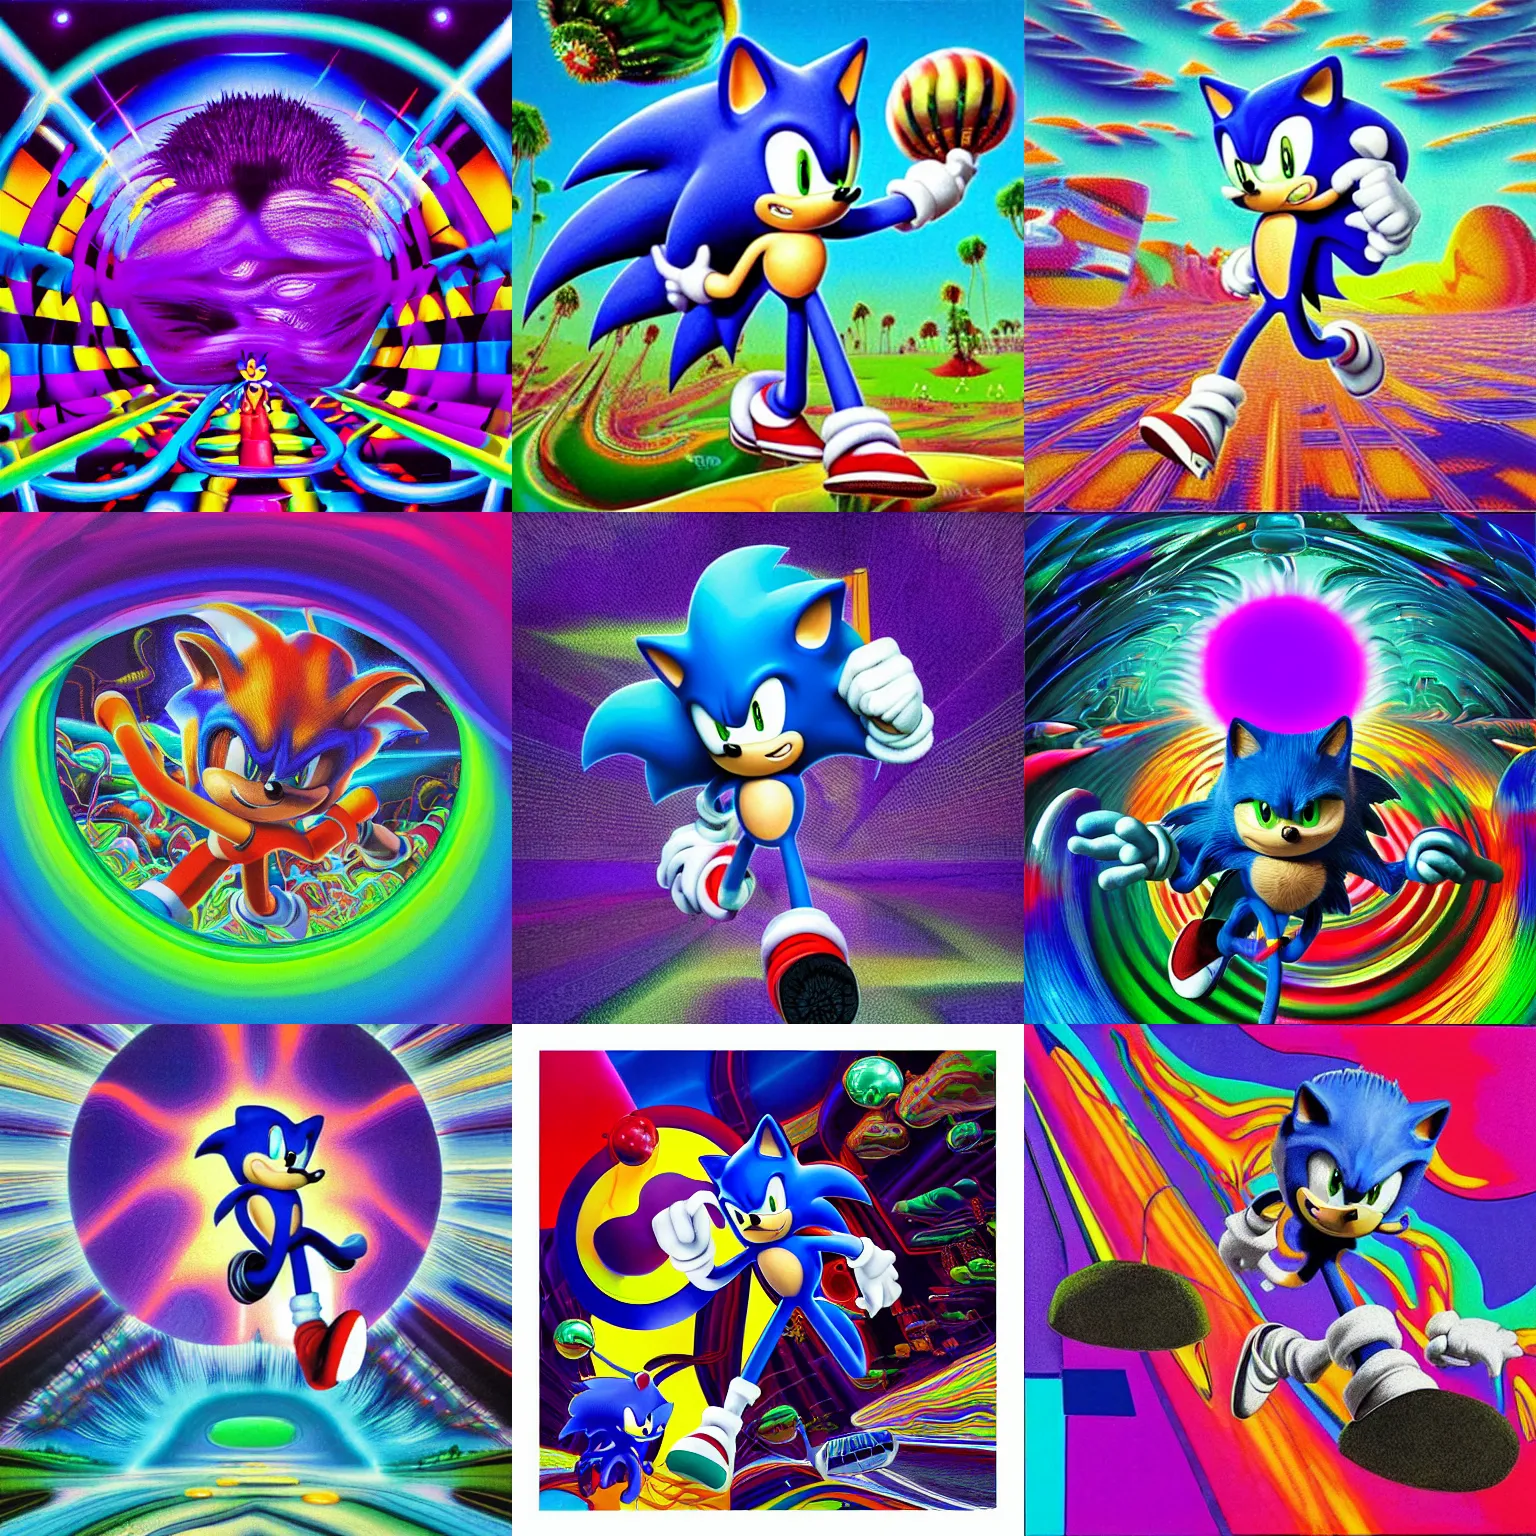 Prompt: surreal, detailed sonic portrait professional, high quality airbrush art tame impala album cover of a liquid dissolving airbrush art lsd dmt sonic the hedgehog dashing through cyberspace, purple checkerboard background, 1 9 8 0 s 1 9 8 2 sega genesis video game album cover